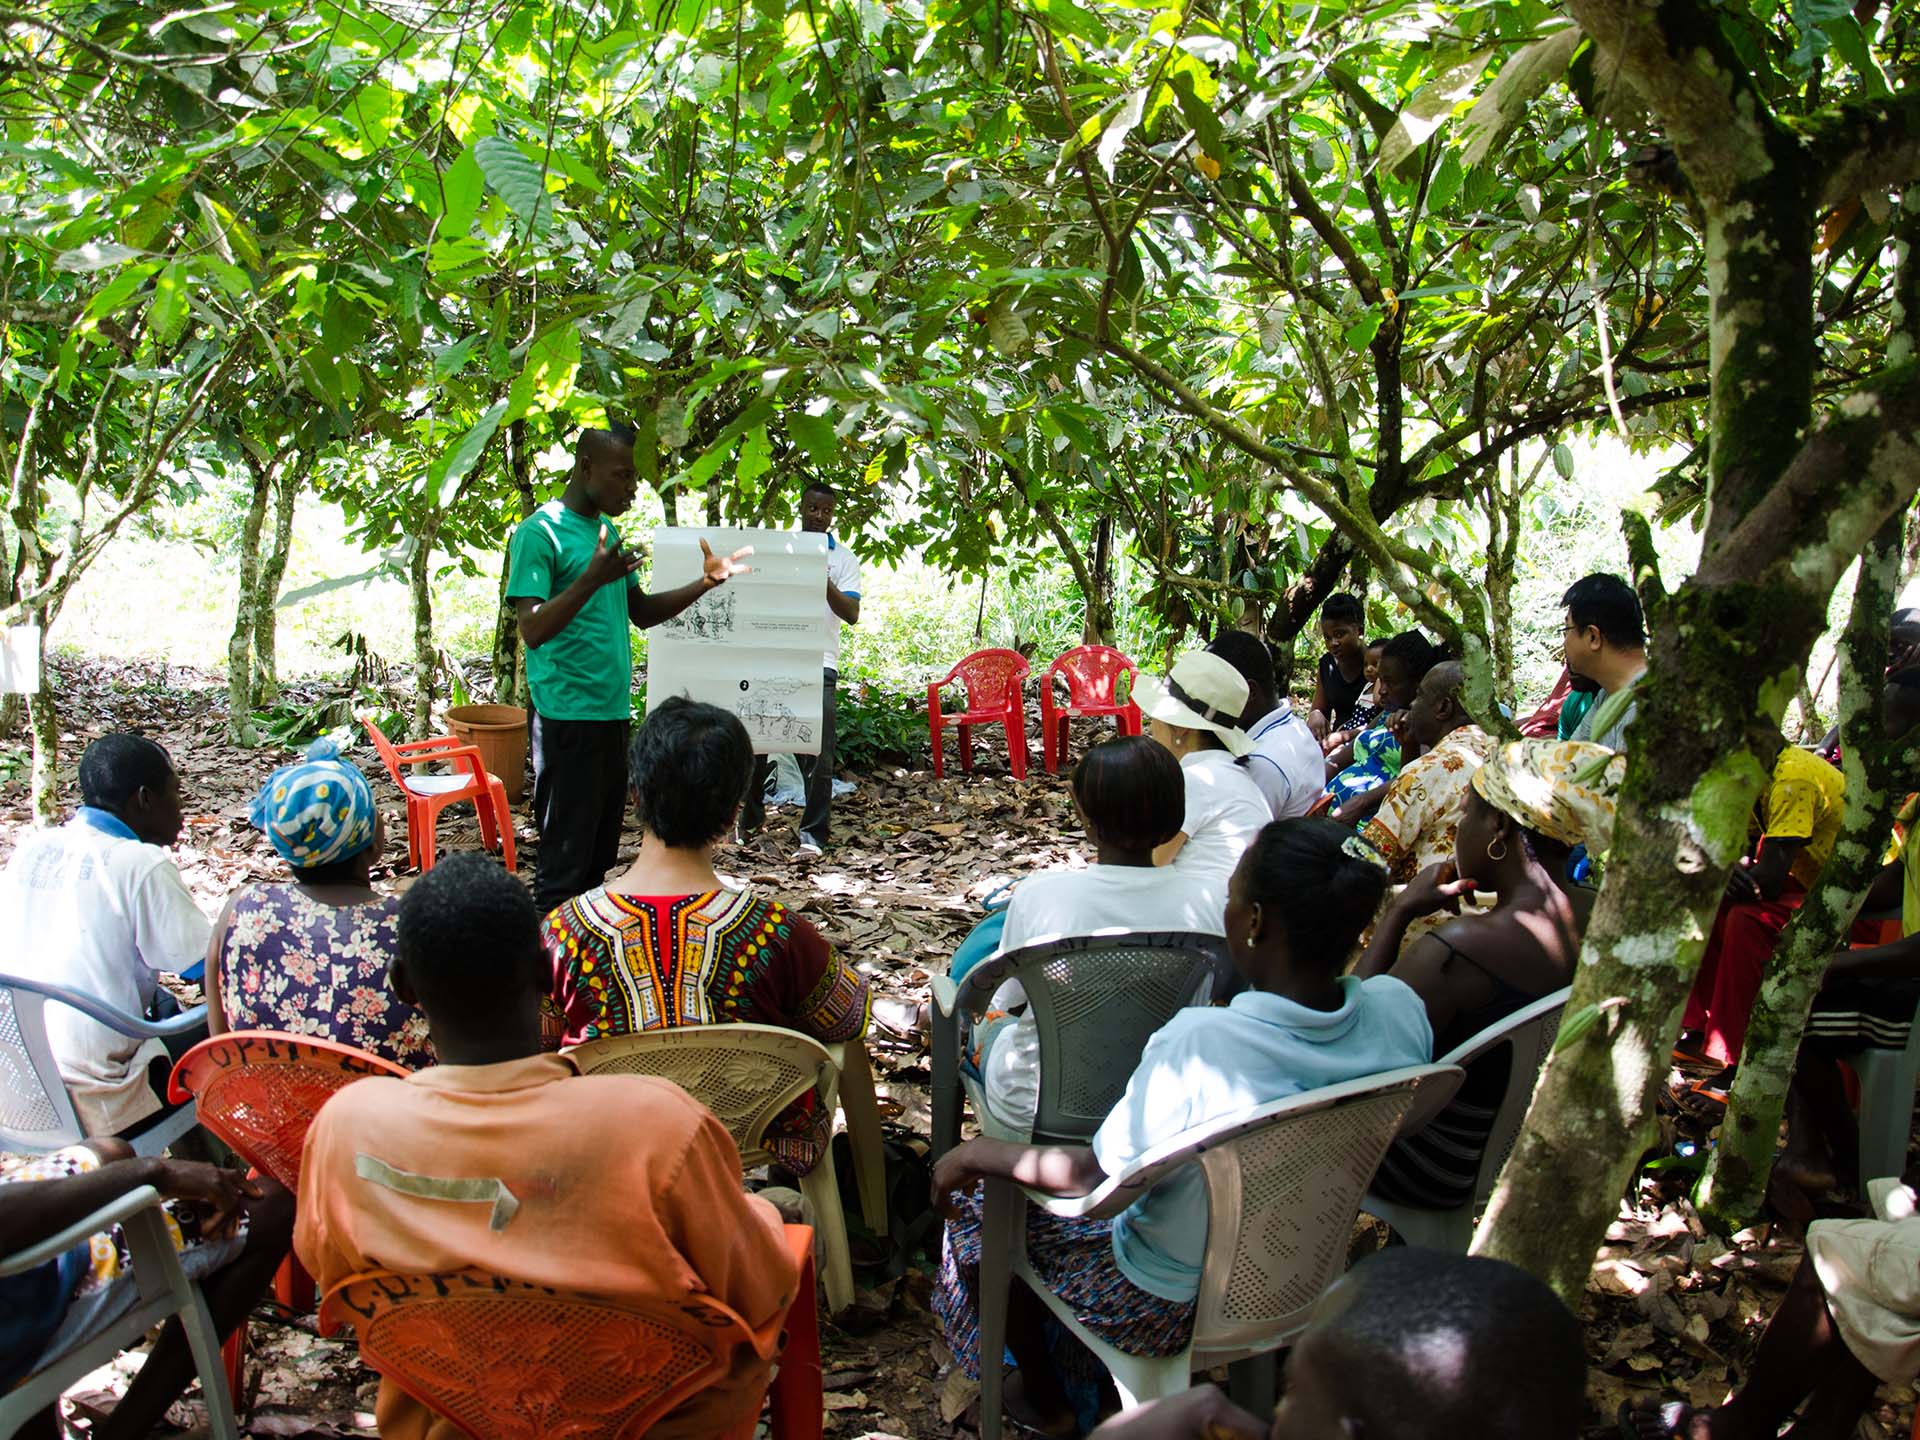 Photo: Villagers learn about the cocoa harvesting process